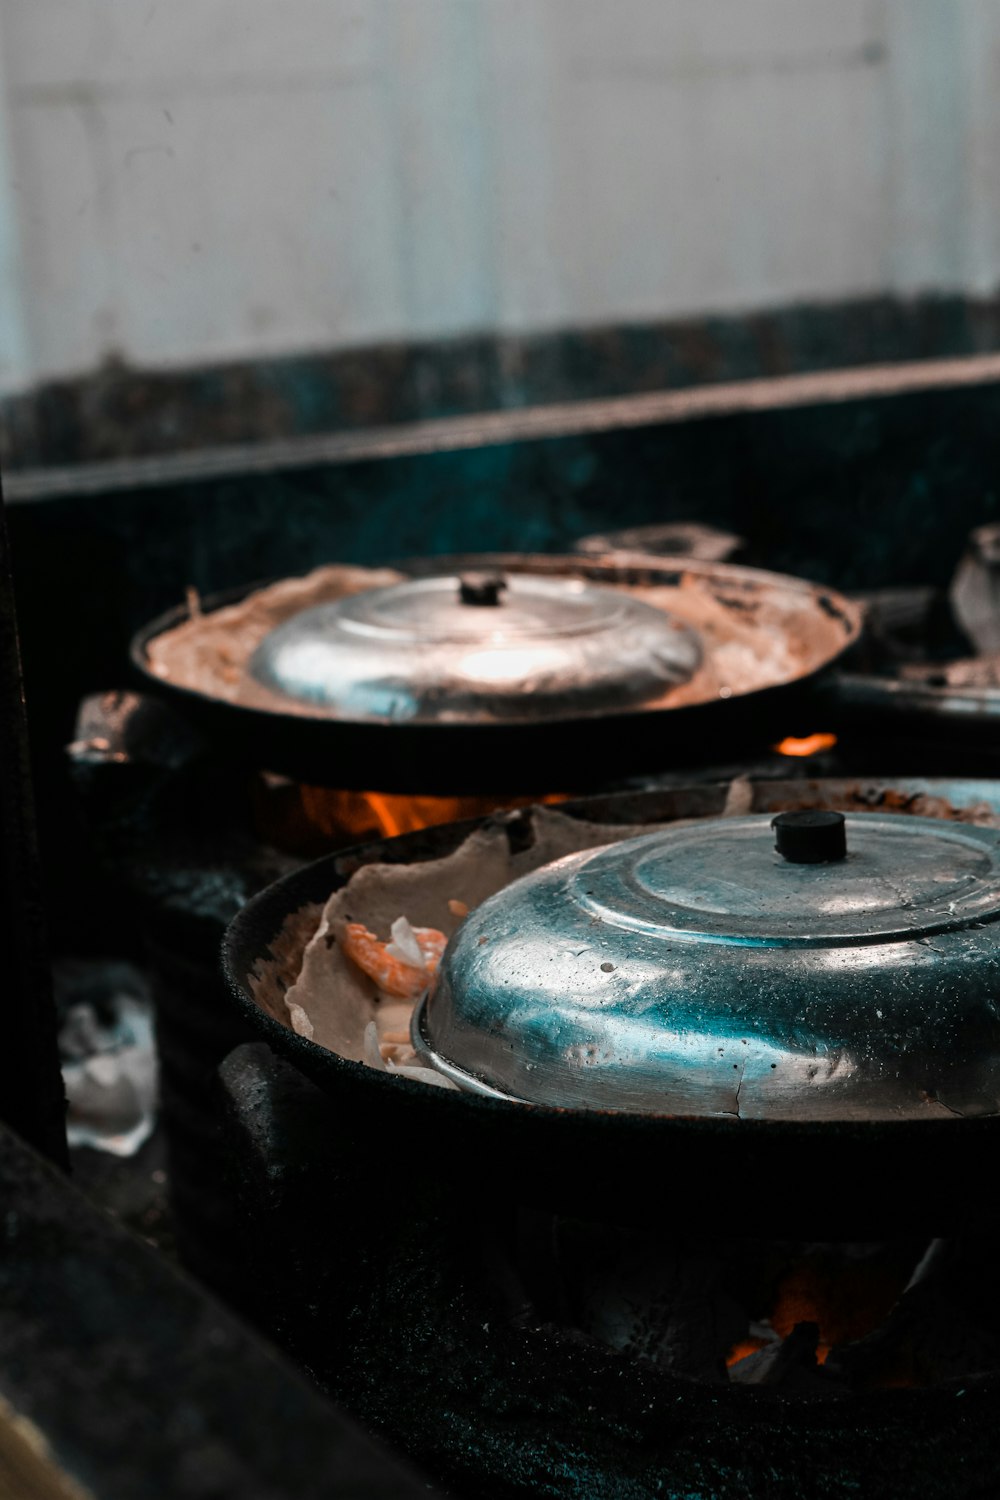 stainless steel cooking pot on stove